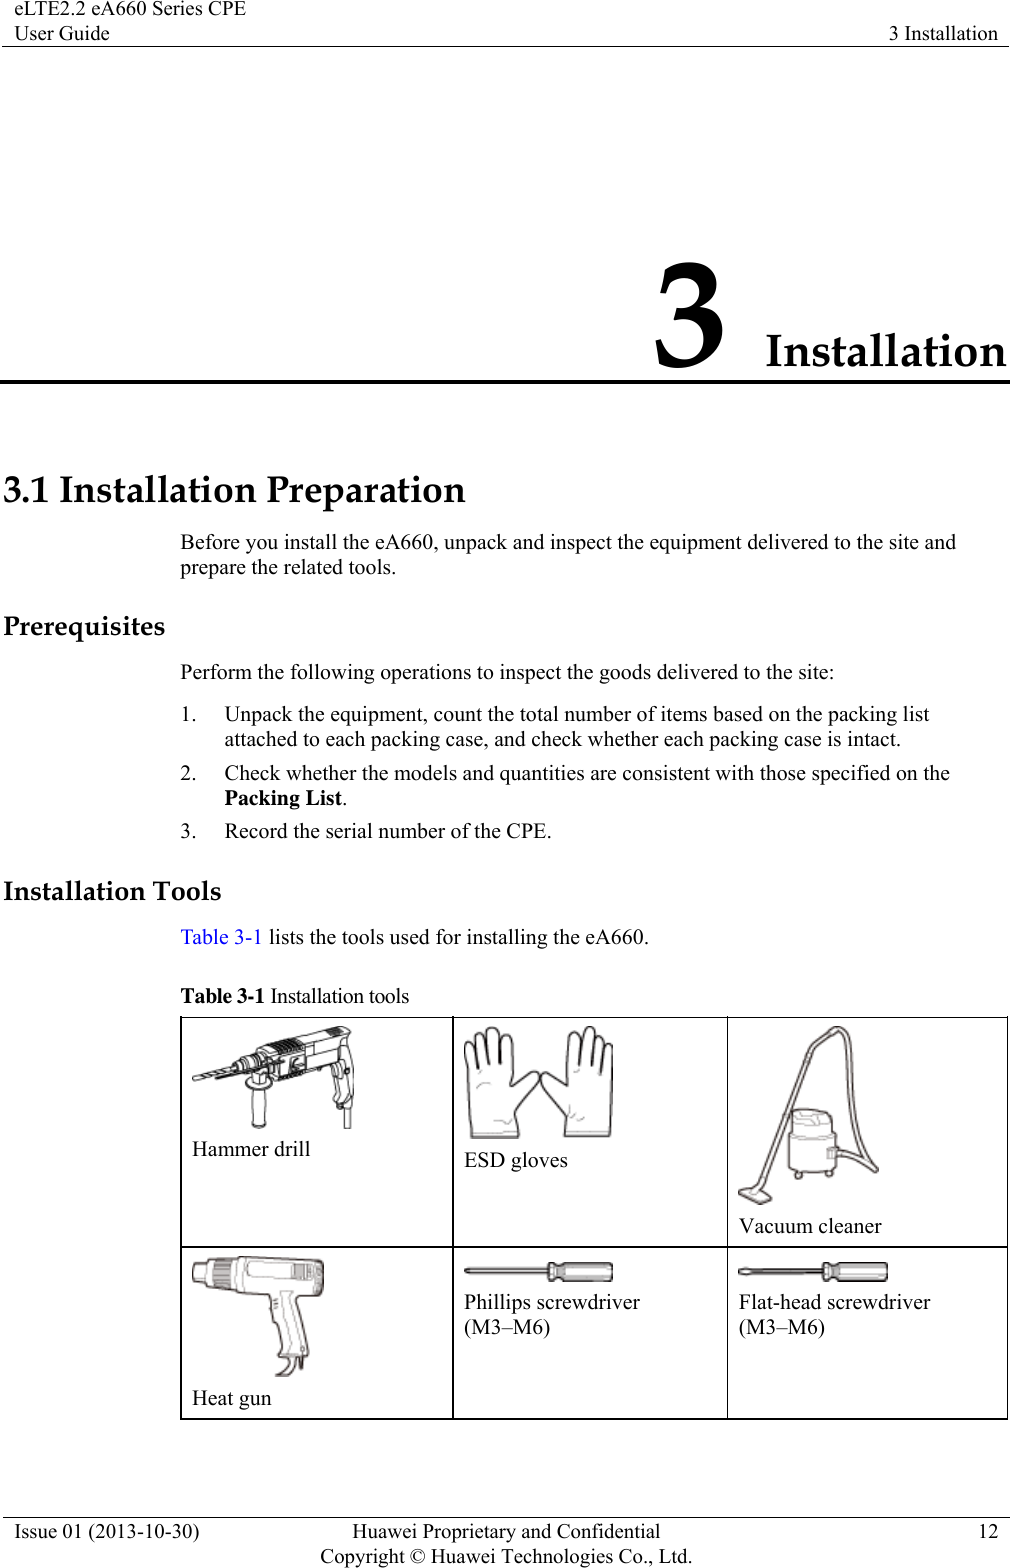 eLTE2.2 eA660 Series CPE User Guide  3 Installation Issue 01 (2013-10-30)  Huawei Proprietary and Confidential         Copyright © Huawei Technologies Co., Ltd.12 3 Installation 3.1 Installation Preparation Before you install the eA660, unpack and inspect the equipment delivered to the site and prepare the related tools. Prerequisites Perform the following operations to inspect the goods delivered to the site: 1. Unpack the equipment, count the total number of items based on the packing list attached to each packing case, and check whether each packing case is intact.   2. Check whether the models and quantities are consistent with those specified on the Packing List. 3. Record the serial number of the CPE.   Installation Tools Table 3-1 lists the tools used for installing the eA660. Table 3-1 Installation tools  Hammer drill   ESD gloves  Vacuum cleaner  Heat gun  Phillips screwdriver (M3–M6)  Flat-head screwdriver (M3–M6) 